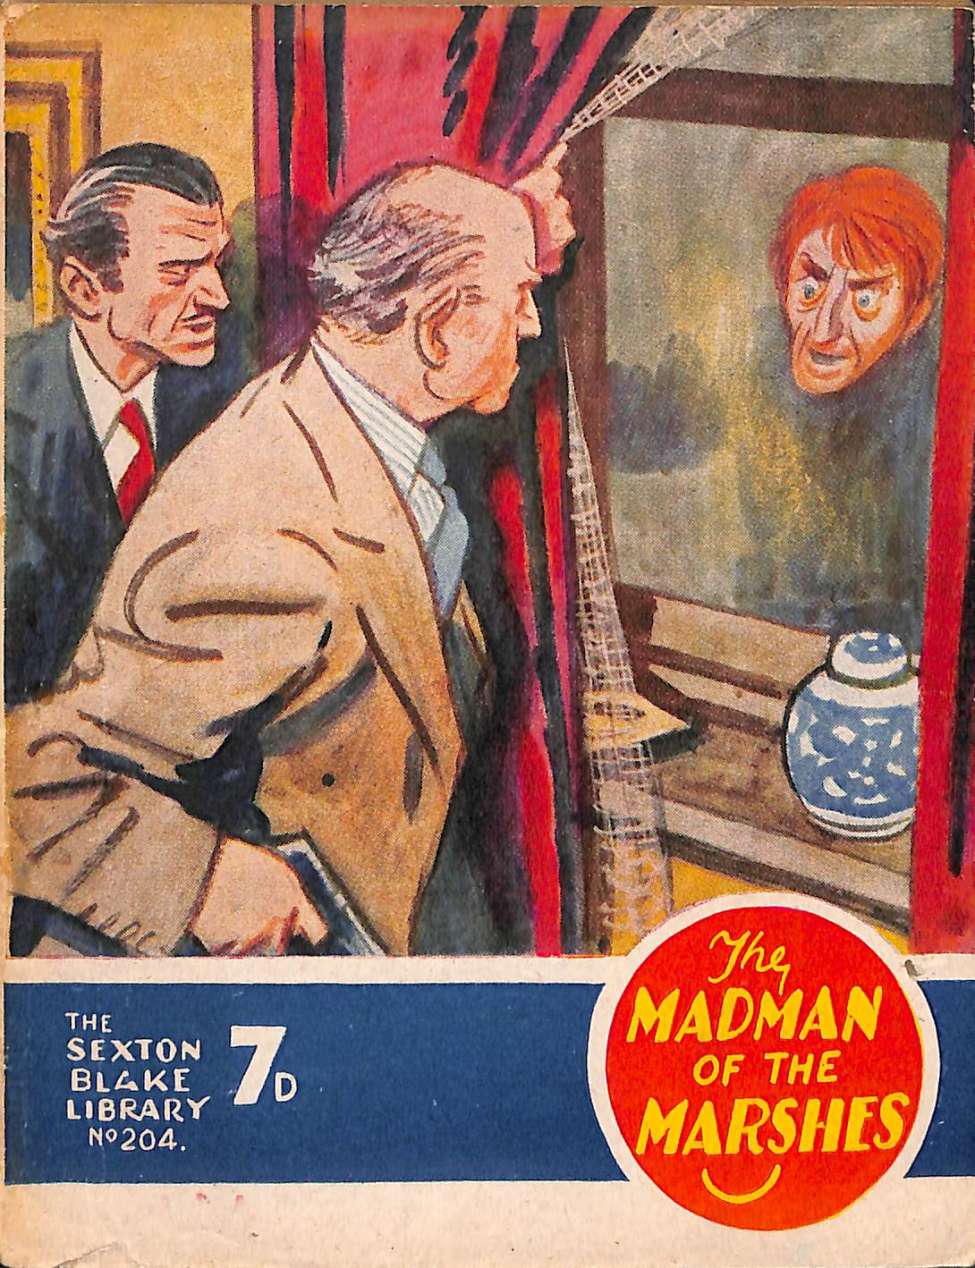 Book Cover For Sexton Blake Library S3 204 - The Madman of the Marshes